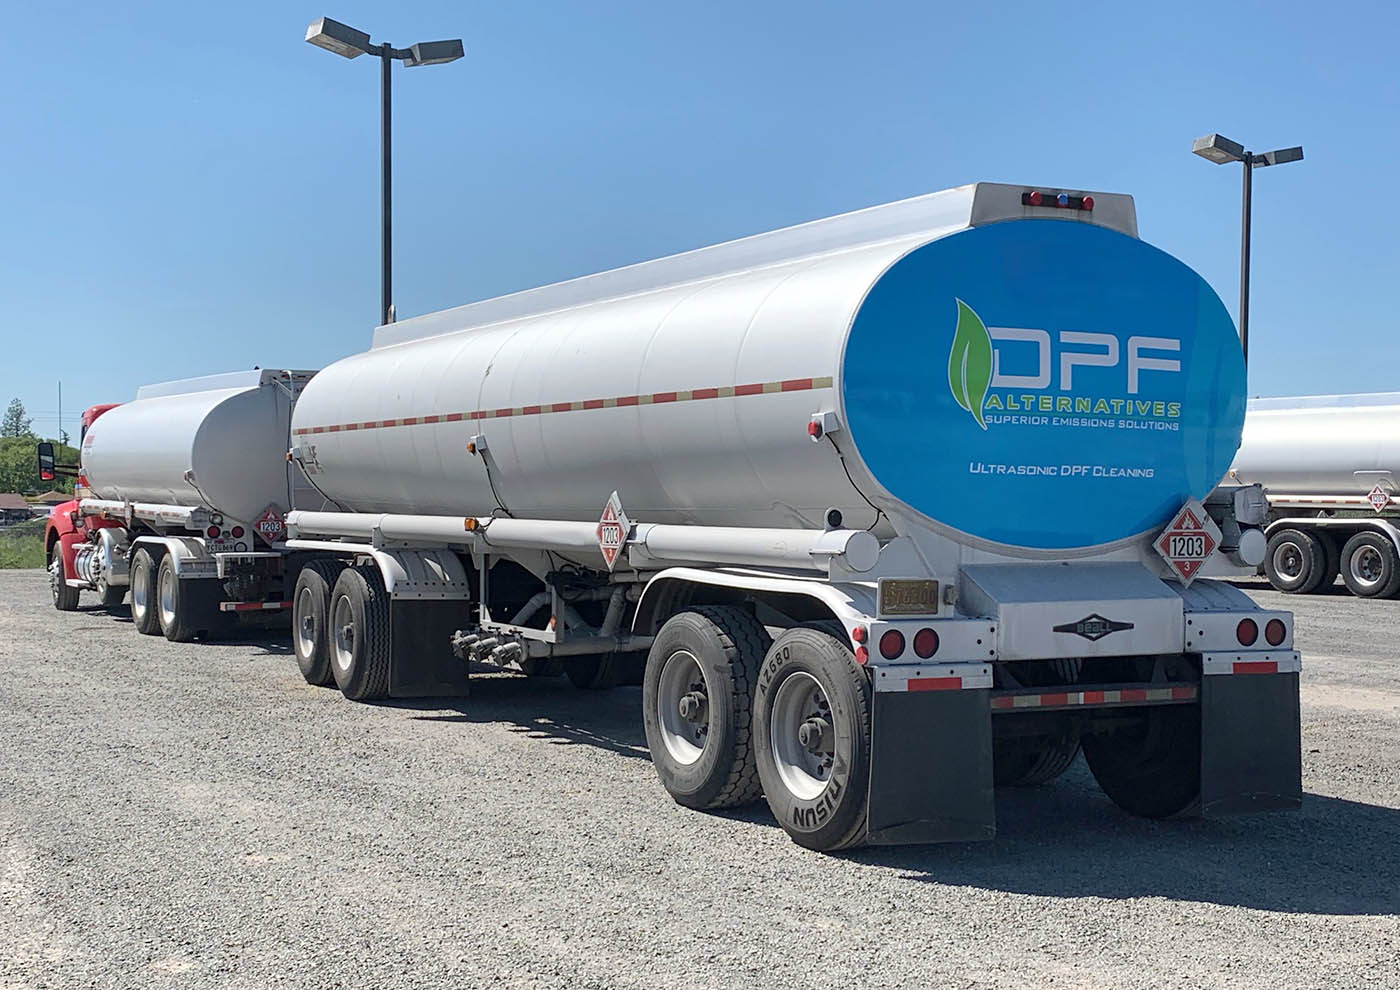 Back of a clean, large, reflective semi truck rig, contact DPF Alternatives for a DPF cleaning in Fort Myers, FL.